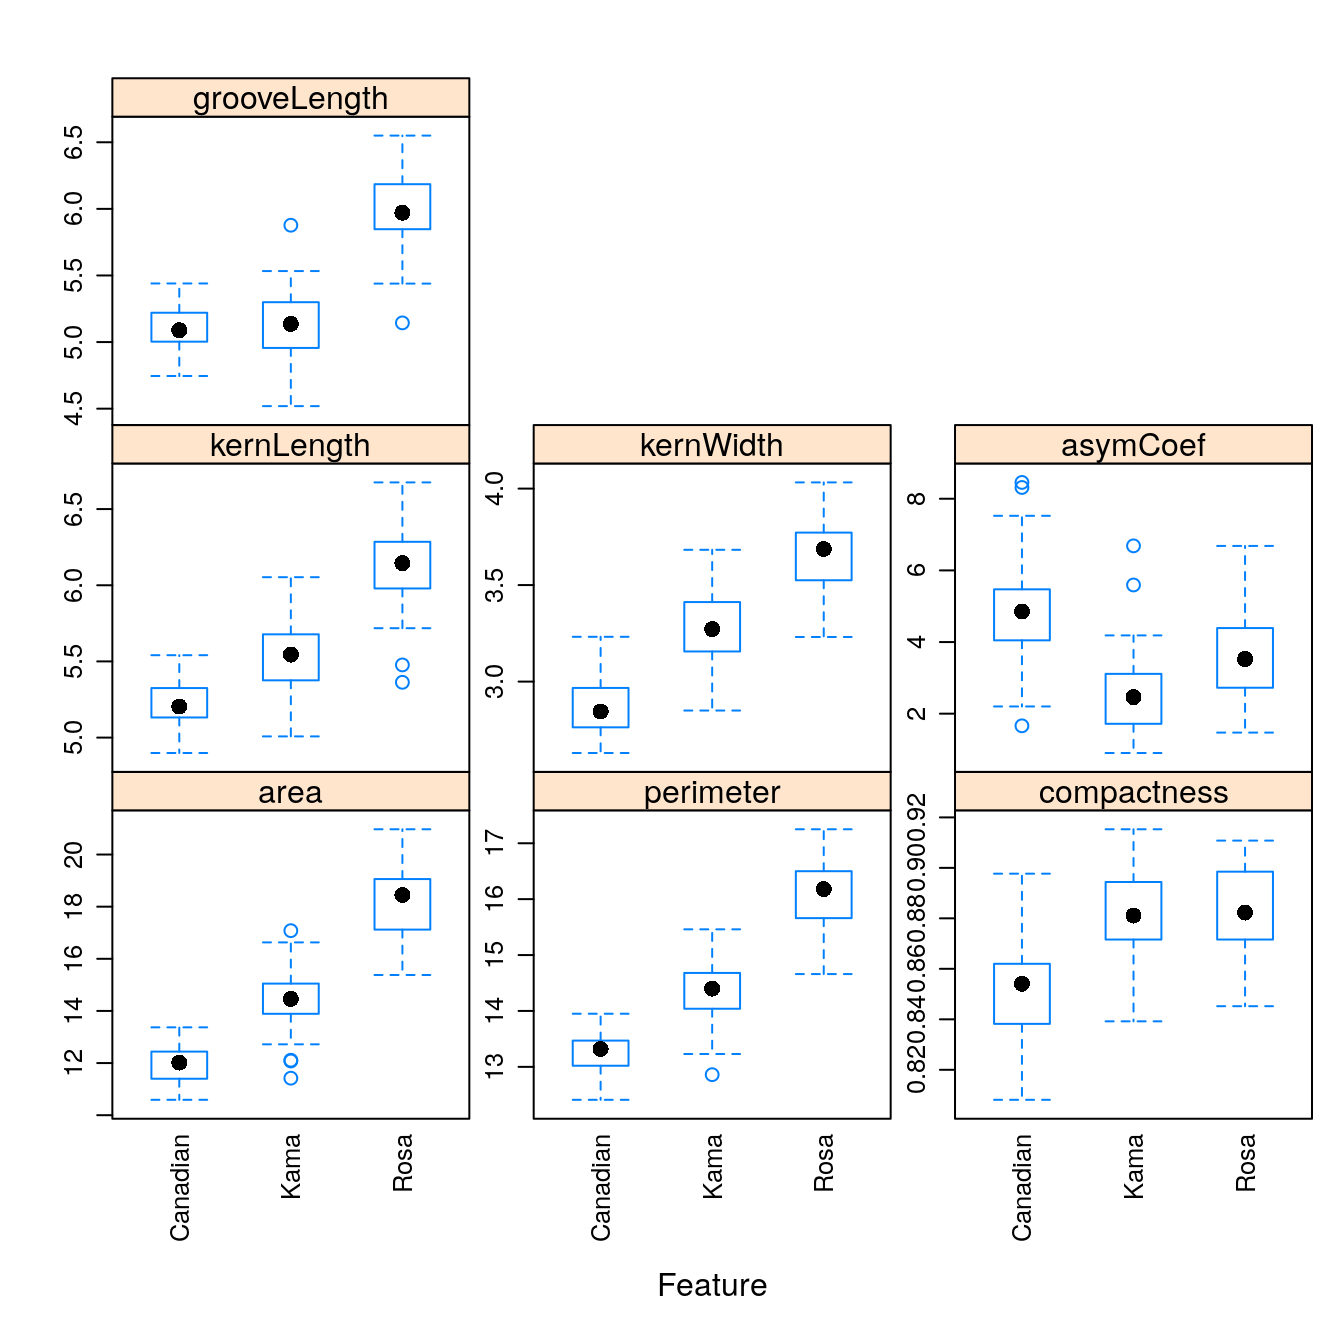 Boxplots of the 7 geometric parameters in the wheat data set